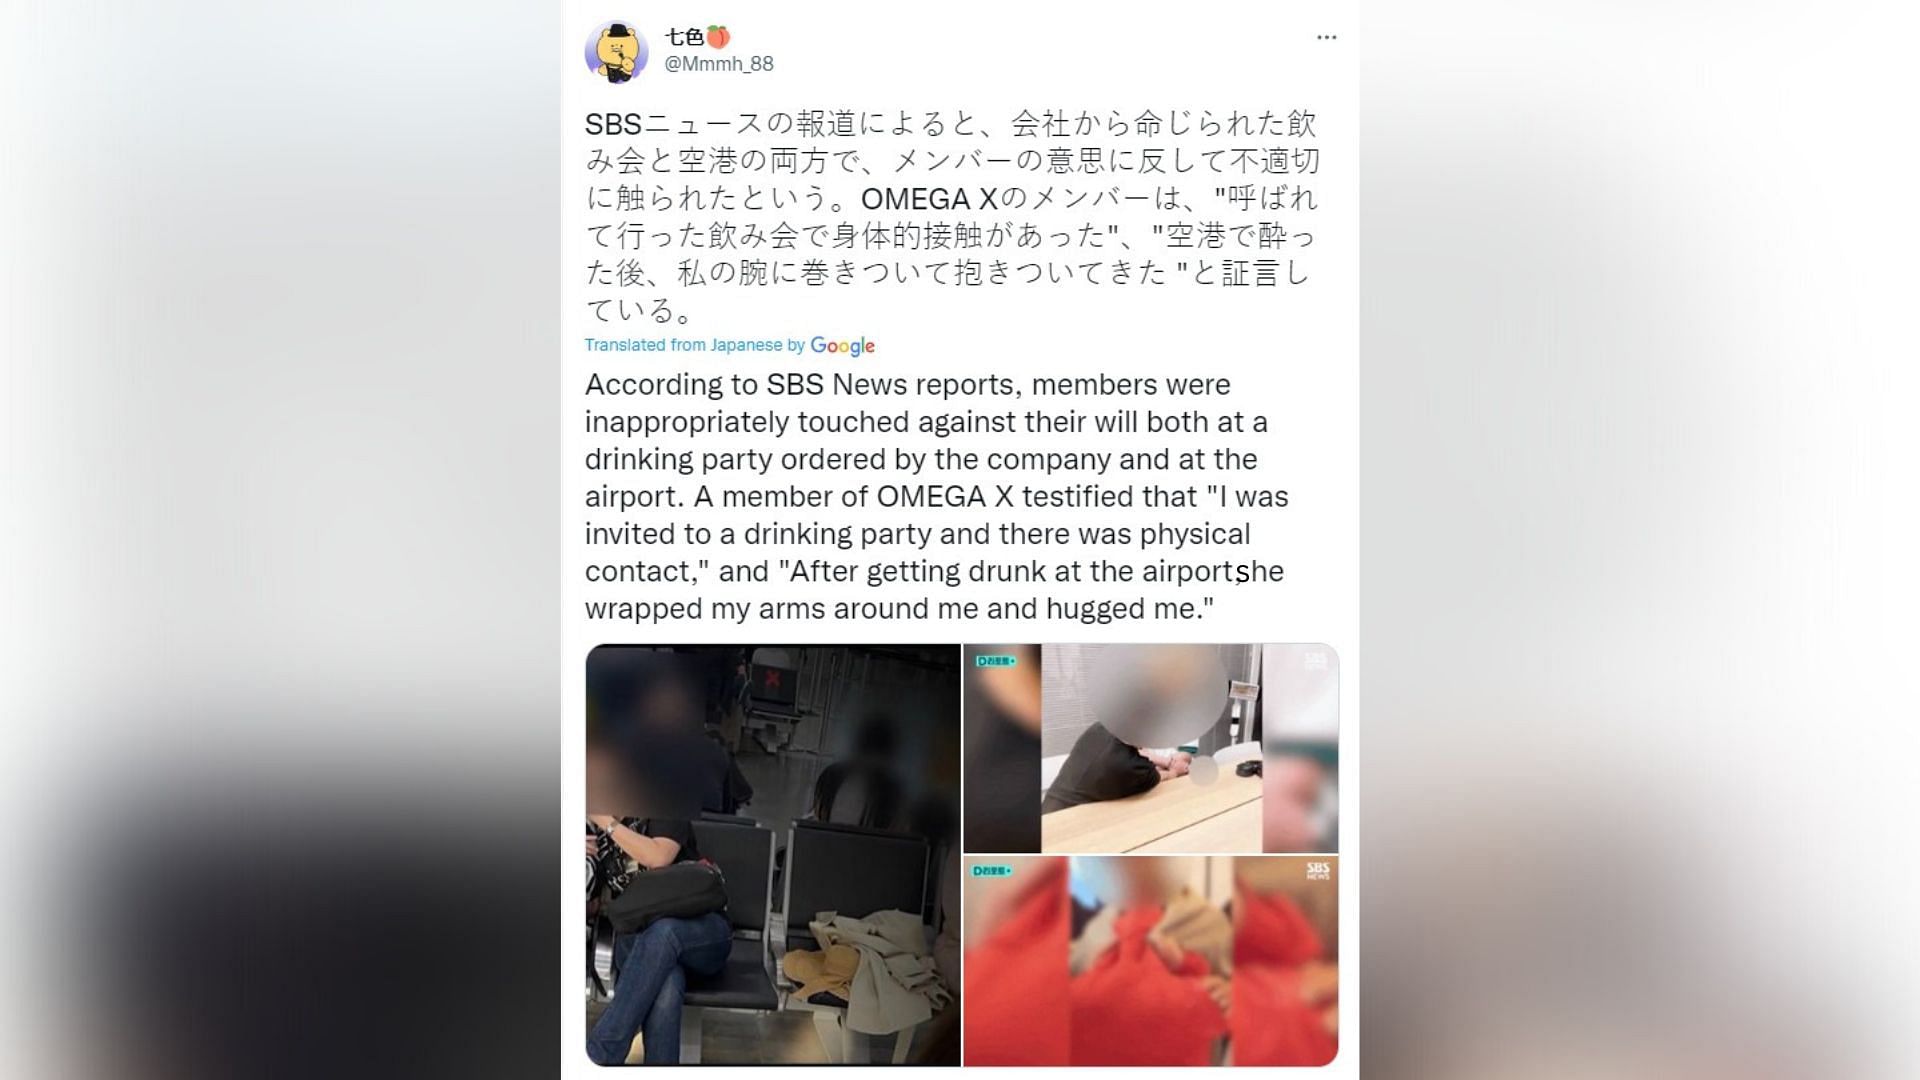 Pictures released by OMEGA X as evidence of inappropriate touch from CEO Kang (Image via Twitter)